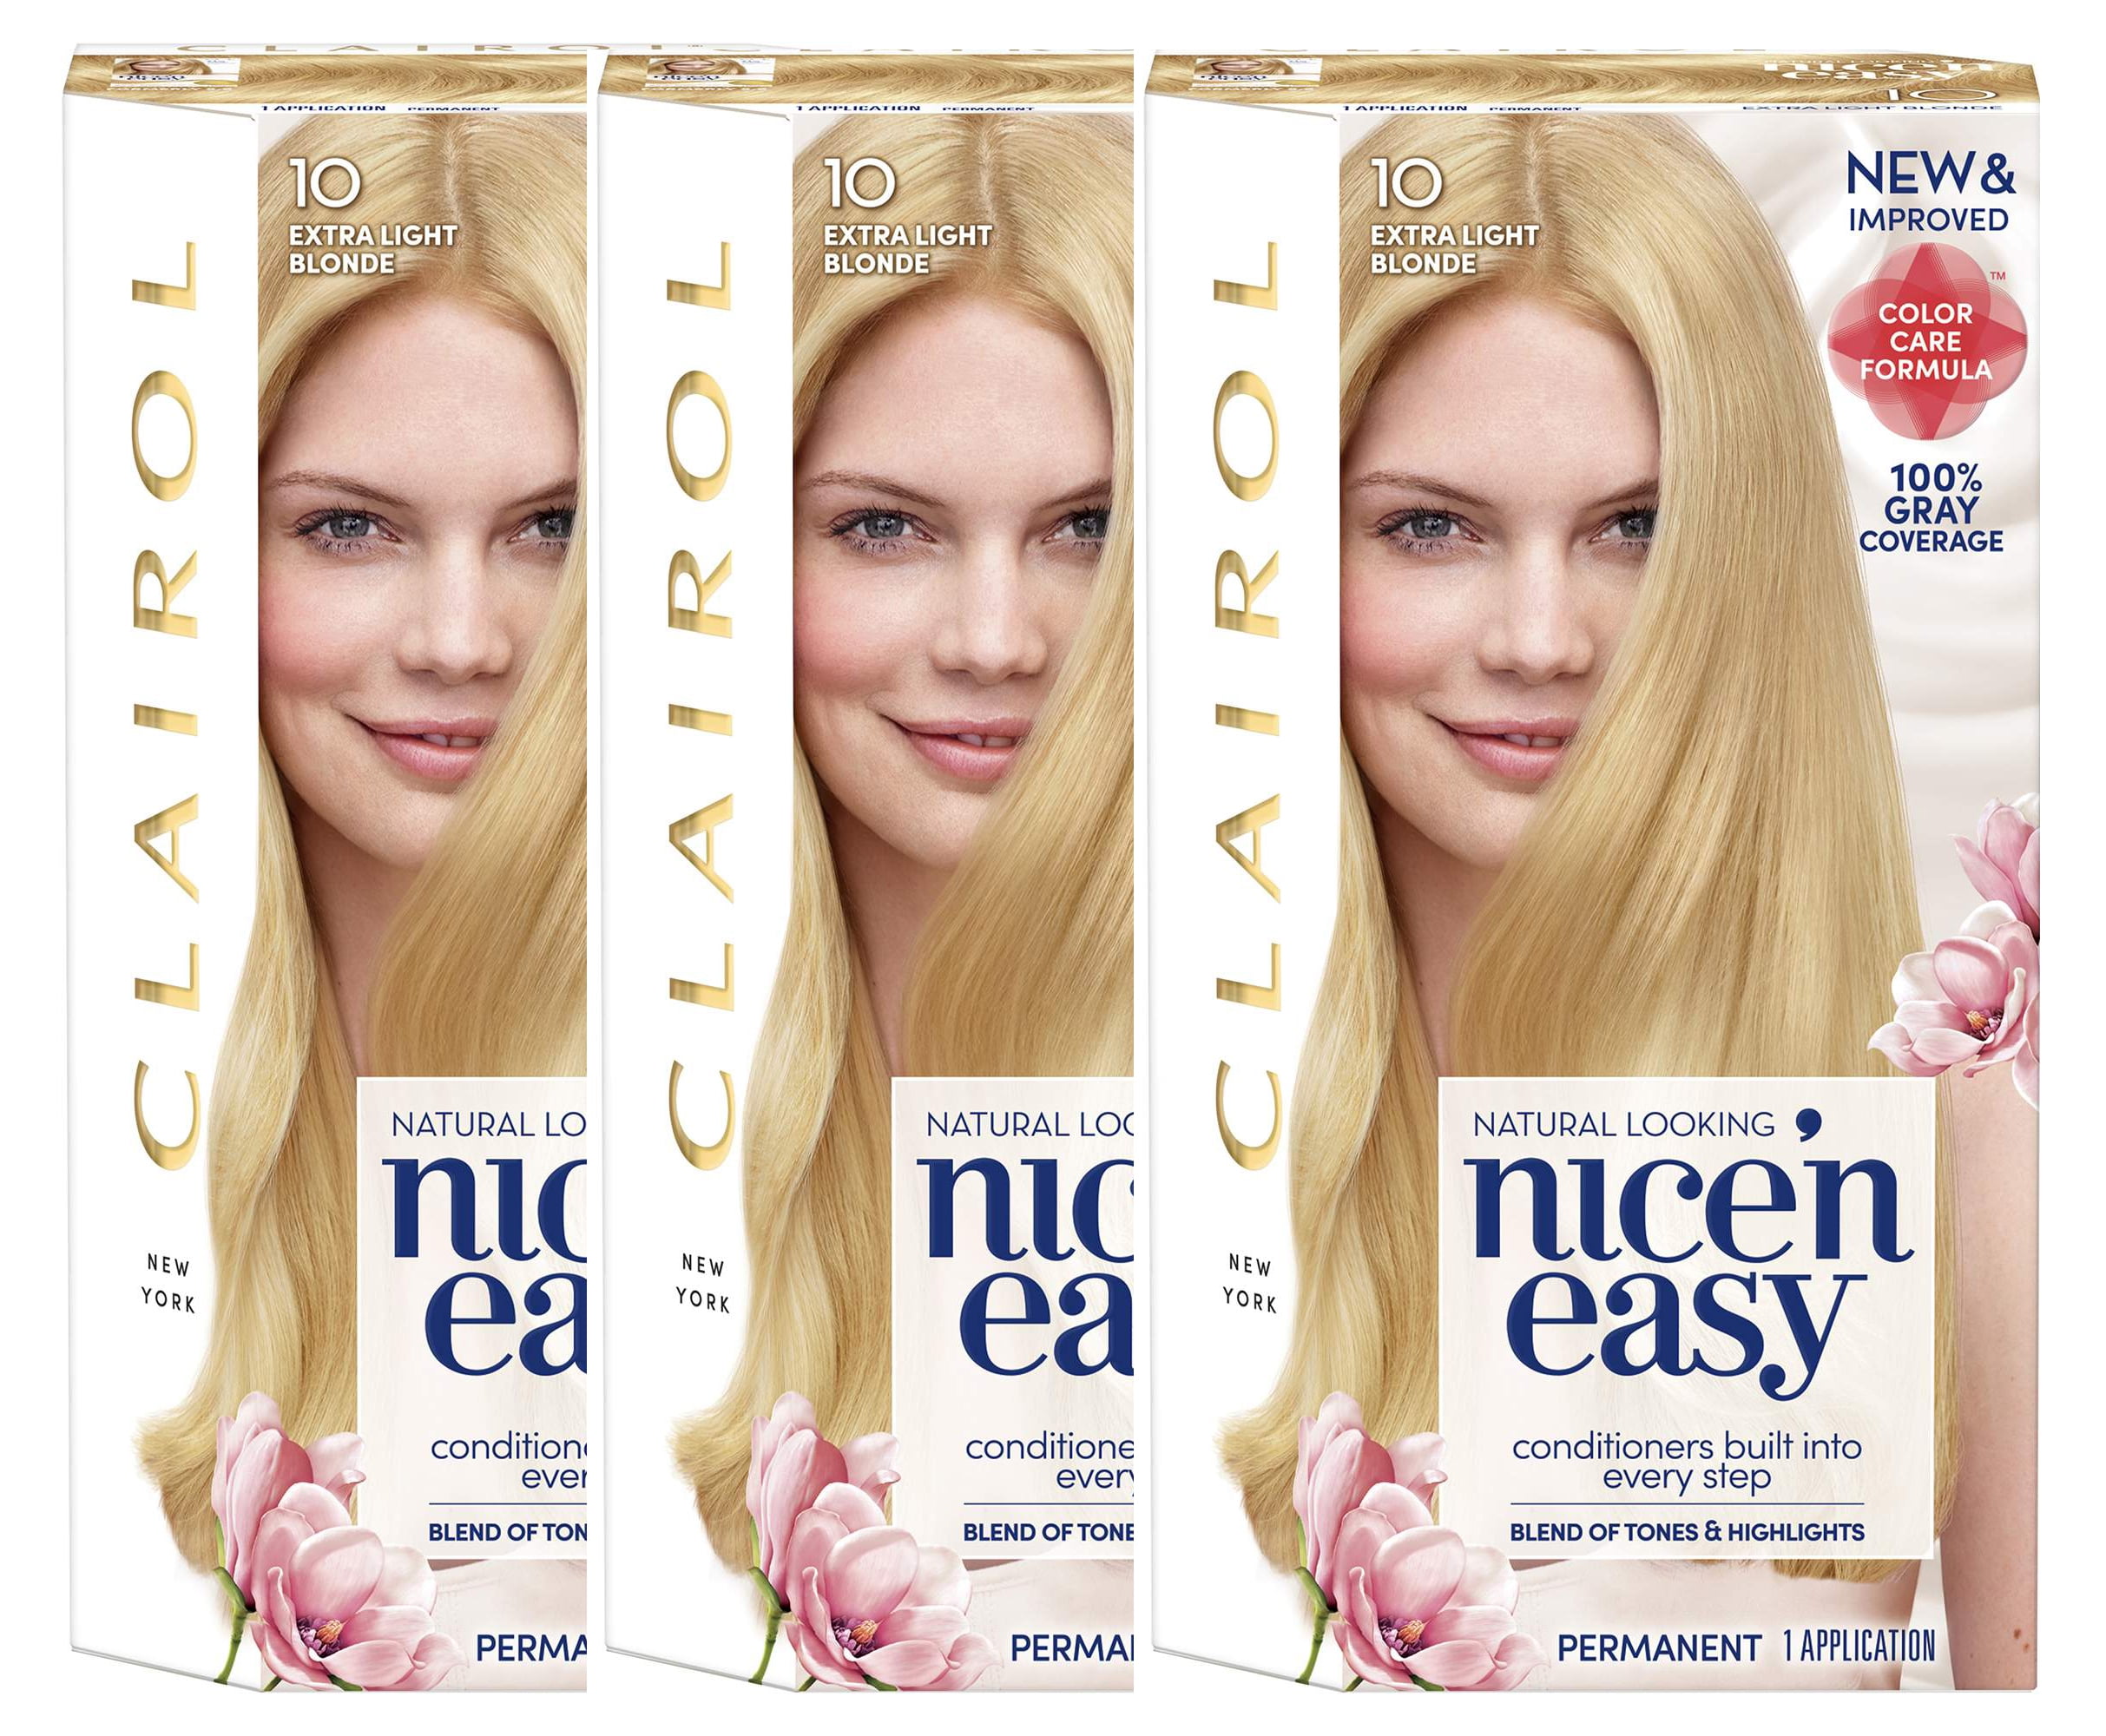 3. Clairol Nice'n Easy Permanent Hair Color, 9A Light Ash Blonde, Pack of 1 - wide 3